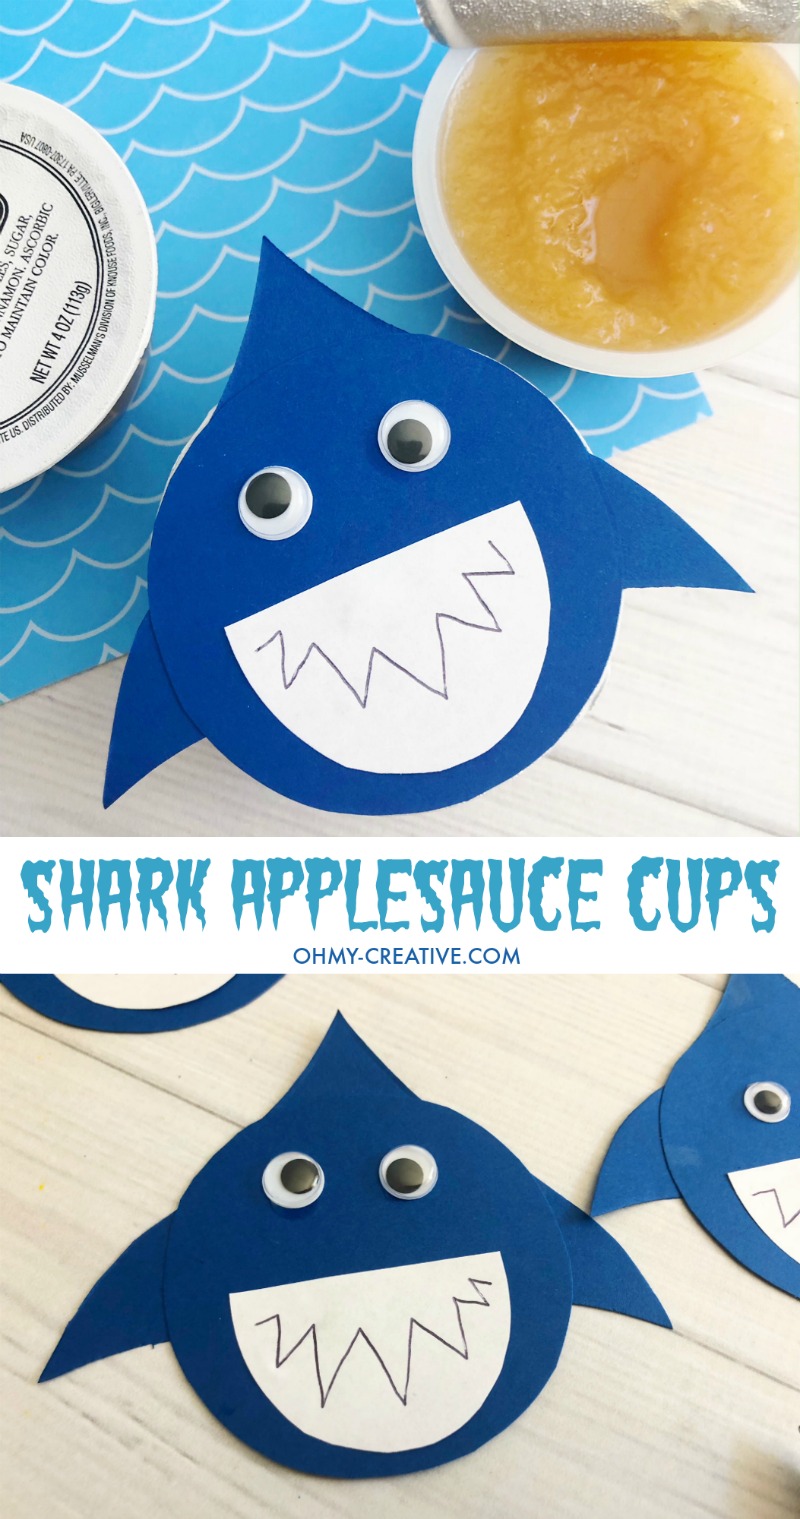 These Shark Applesauce Cups are a fun Shark Party Food or shark craft for kids. Great for Shark Week too! Shark Party | Shark Craft | Shark Food | Applesauce Cups | Applesauce | Shark Party Ideas #sharkweek #sharkparty #sharkpartyfood #applesaucecups 